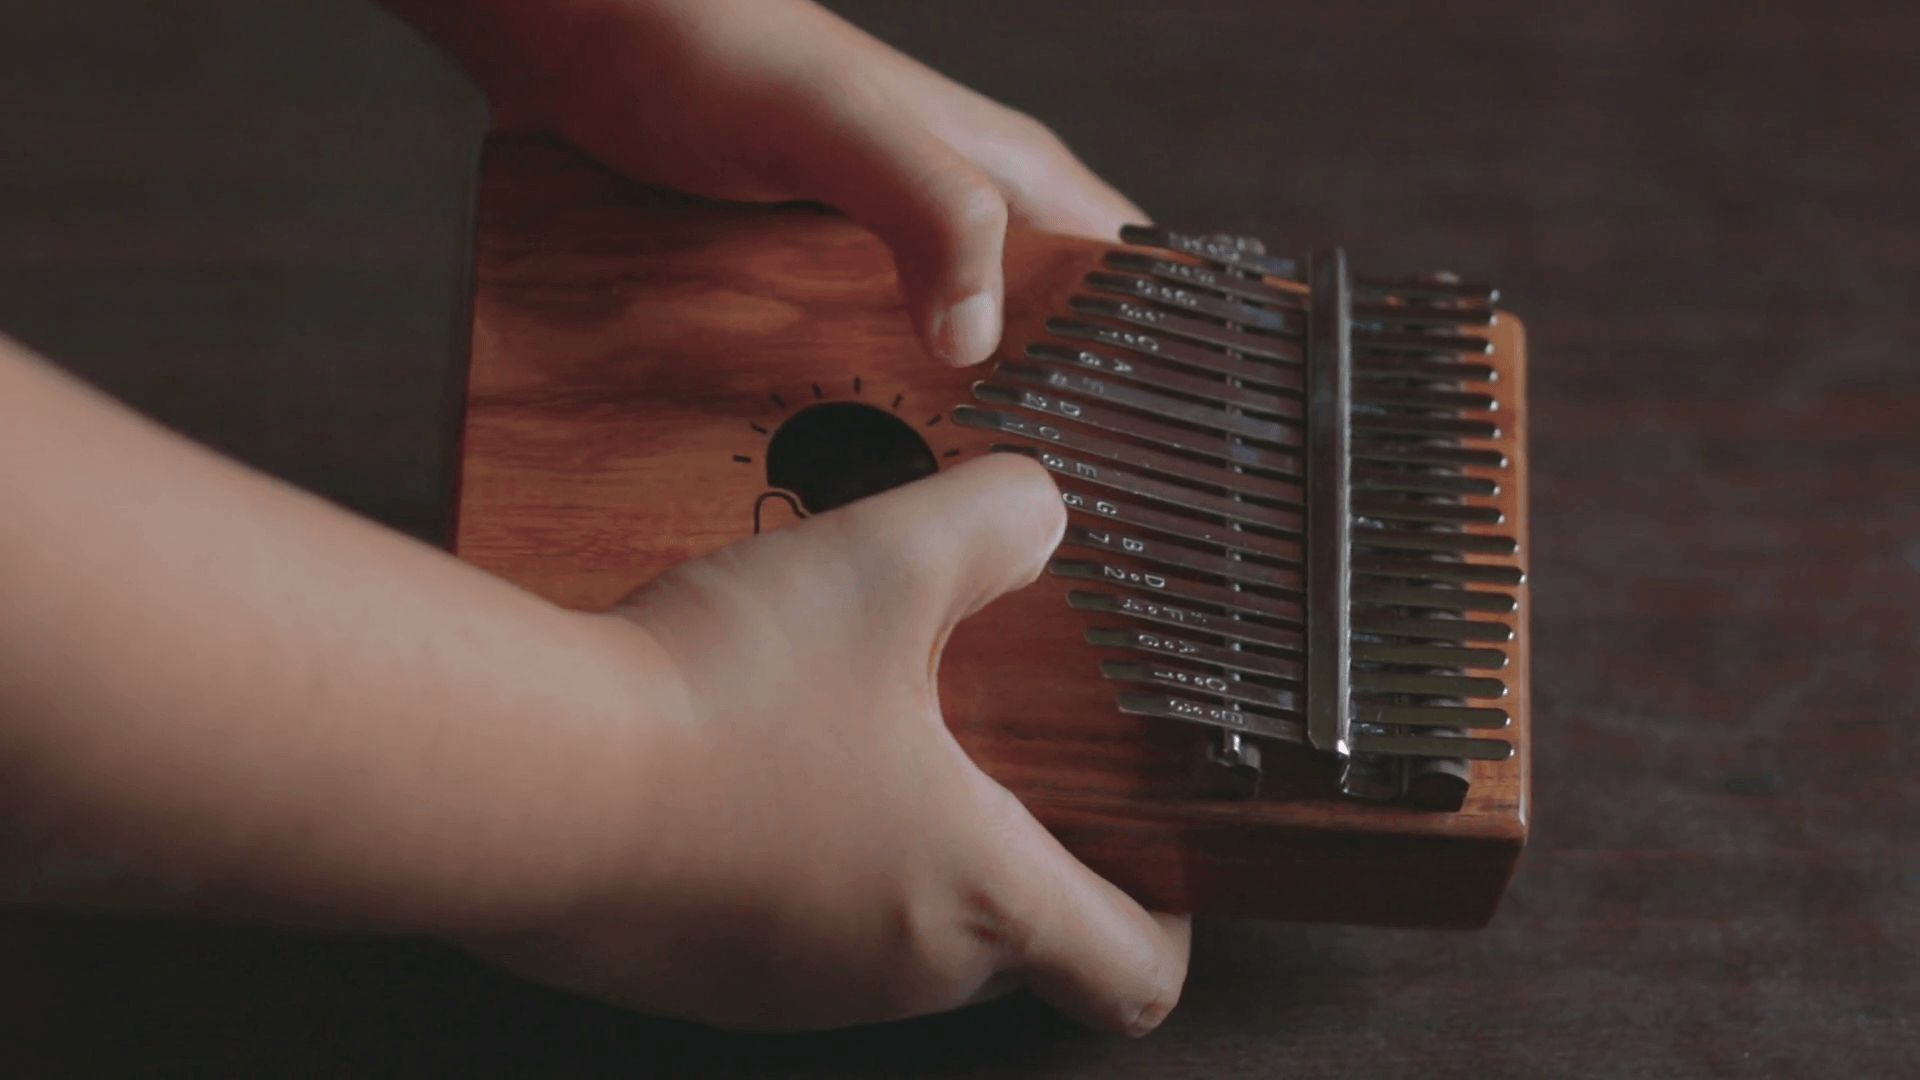 Playing chords on Kalimba. It is an African musical instrument